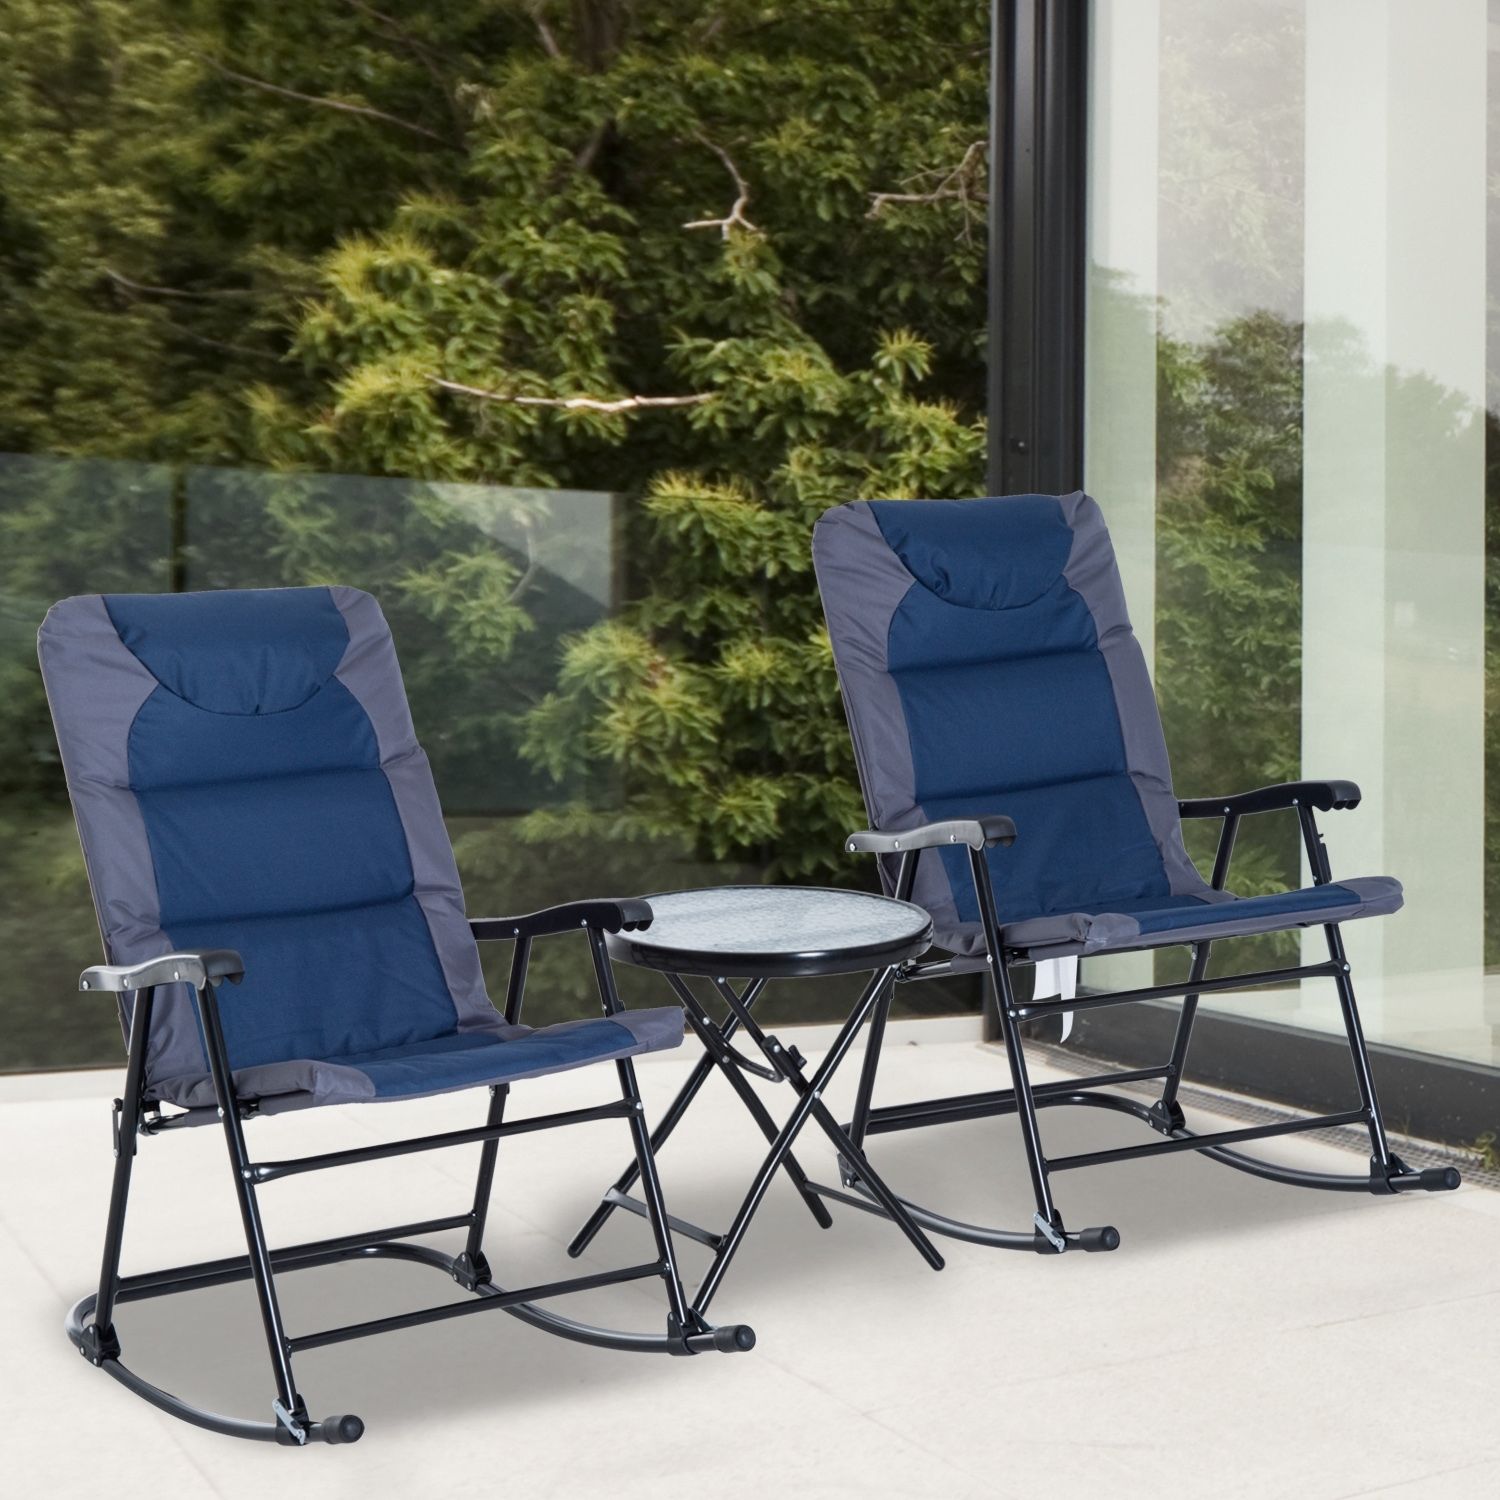 Outsunny 3 Piece Folding Outdoor Rocking Chair And Table Set Patio Pertaining To Patio Rocking Chairs And Table (View 12 of 15)